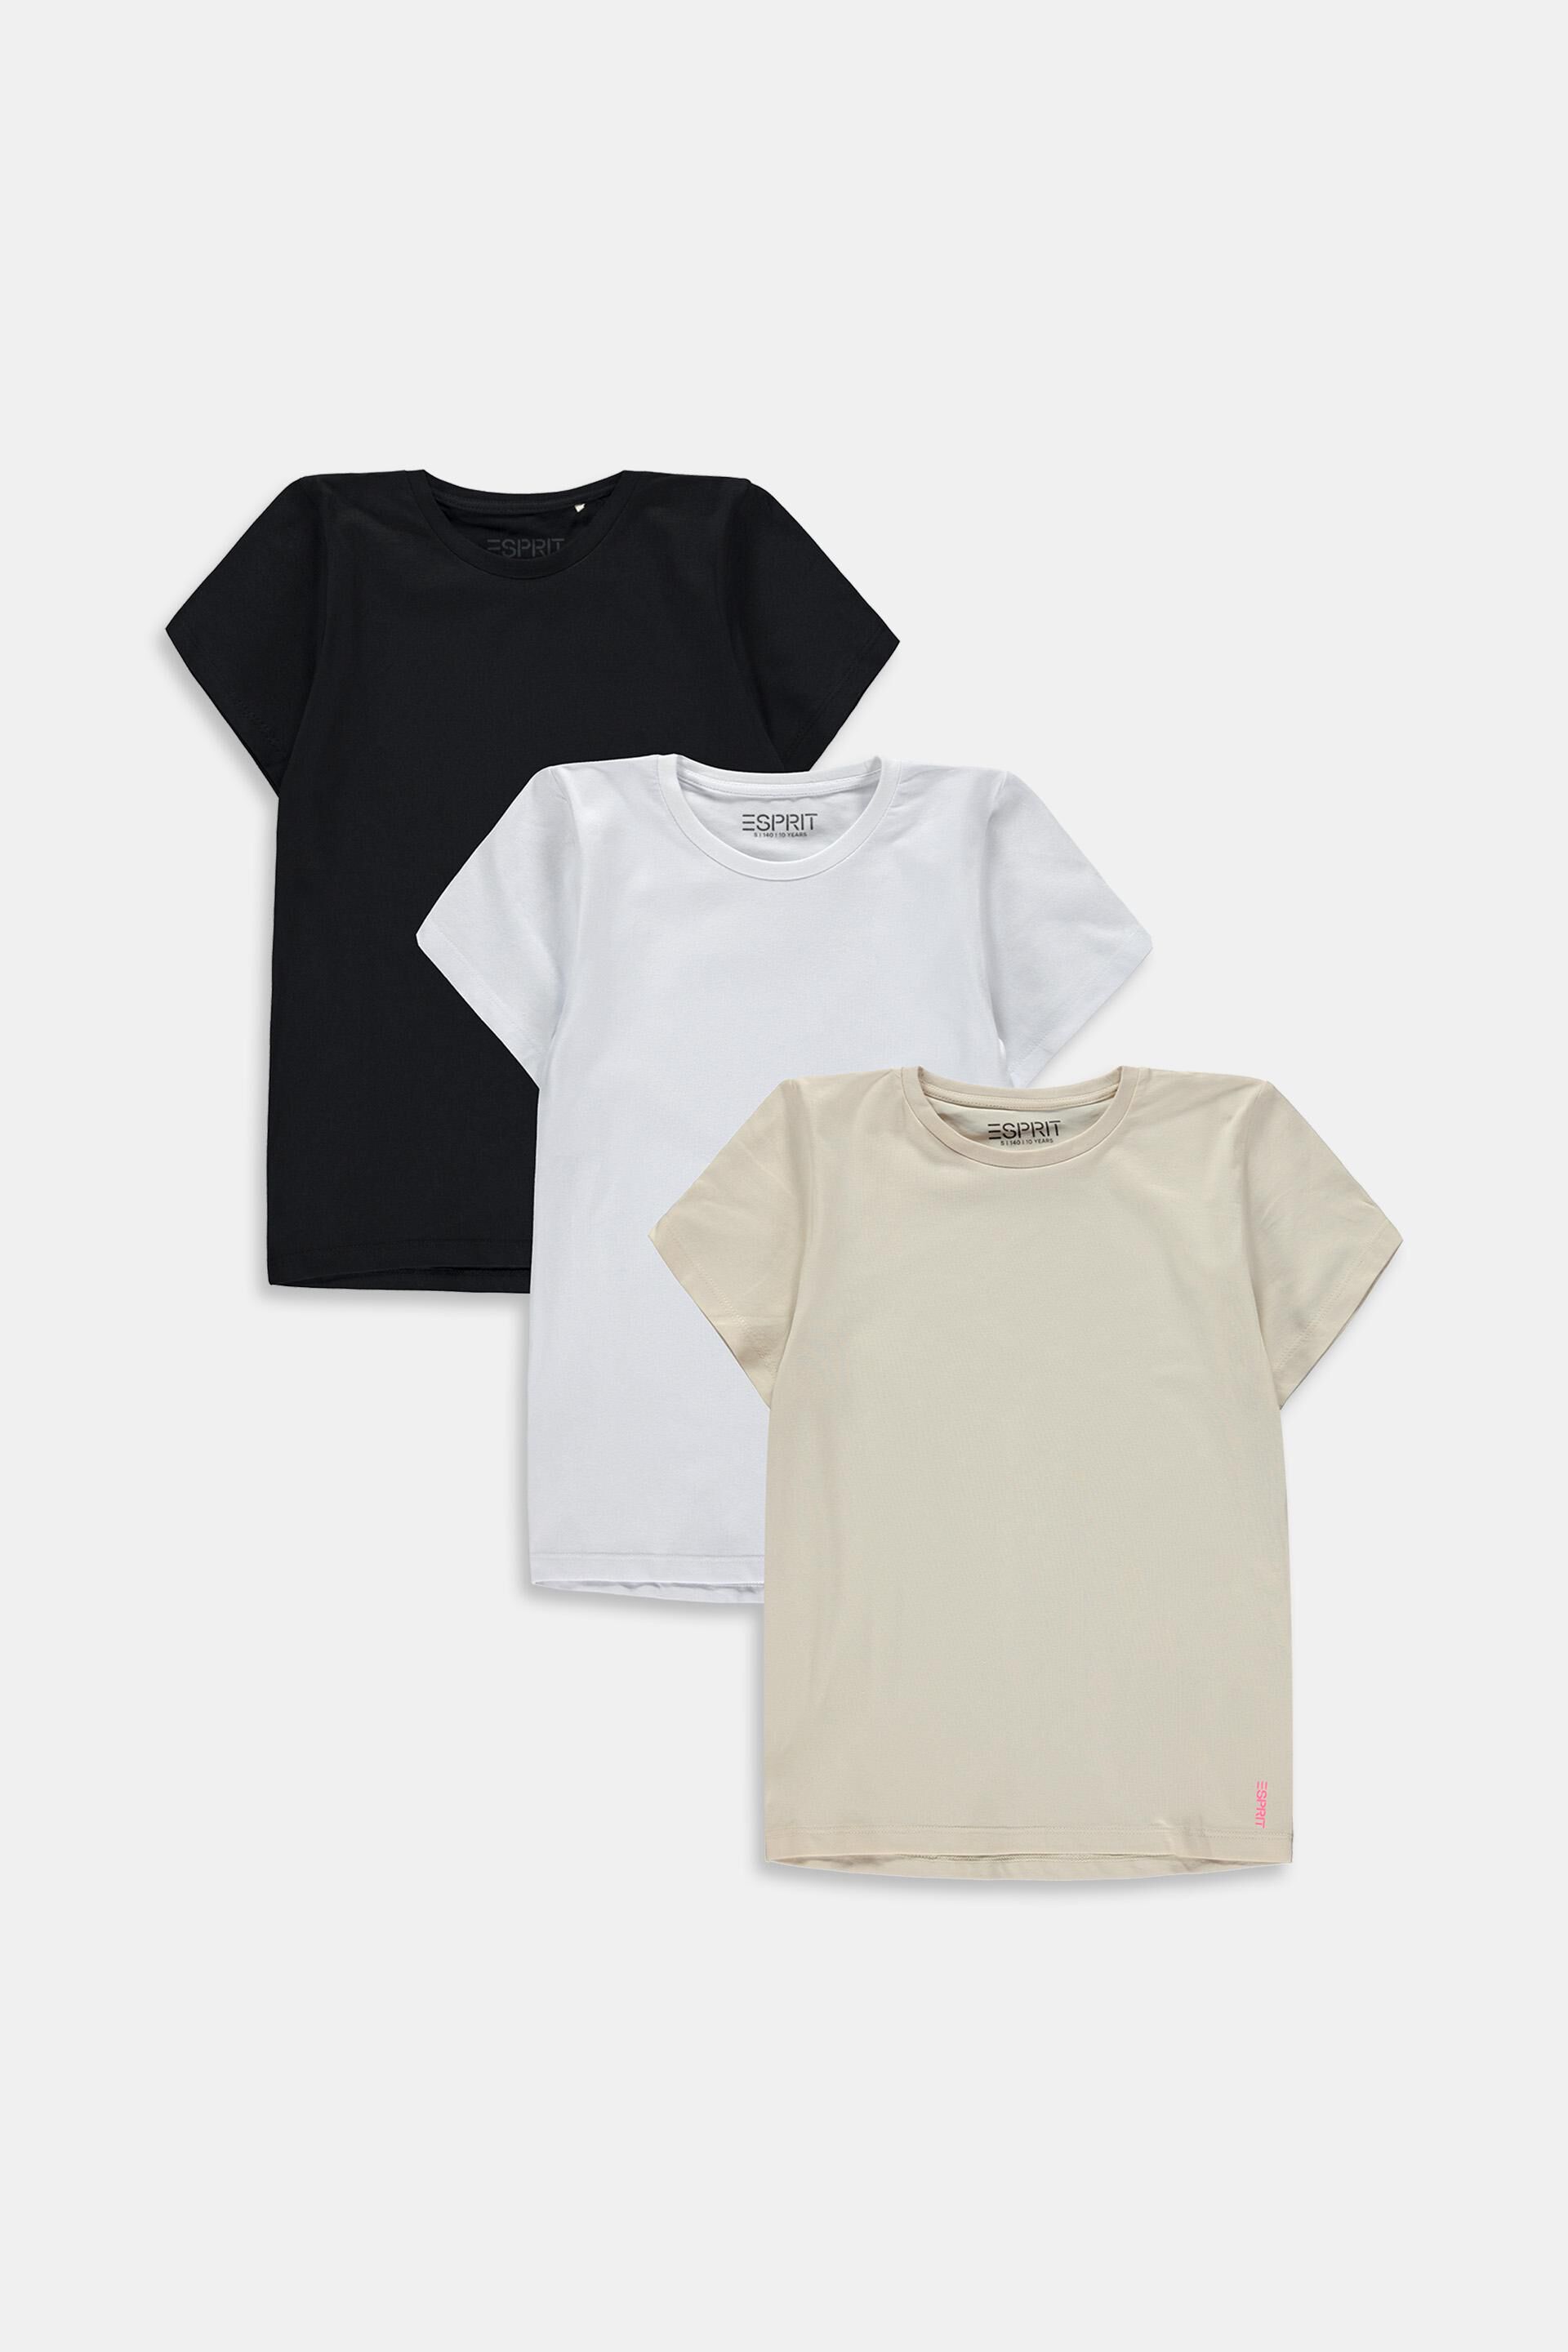 Esprit 3-pack t-shirts of